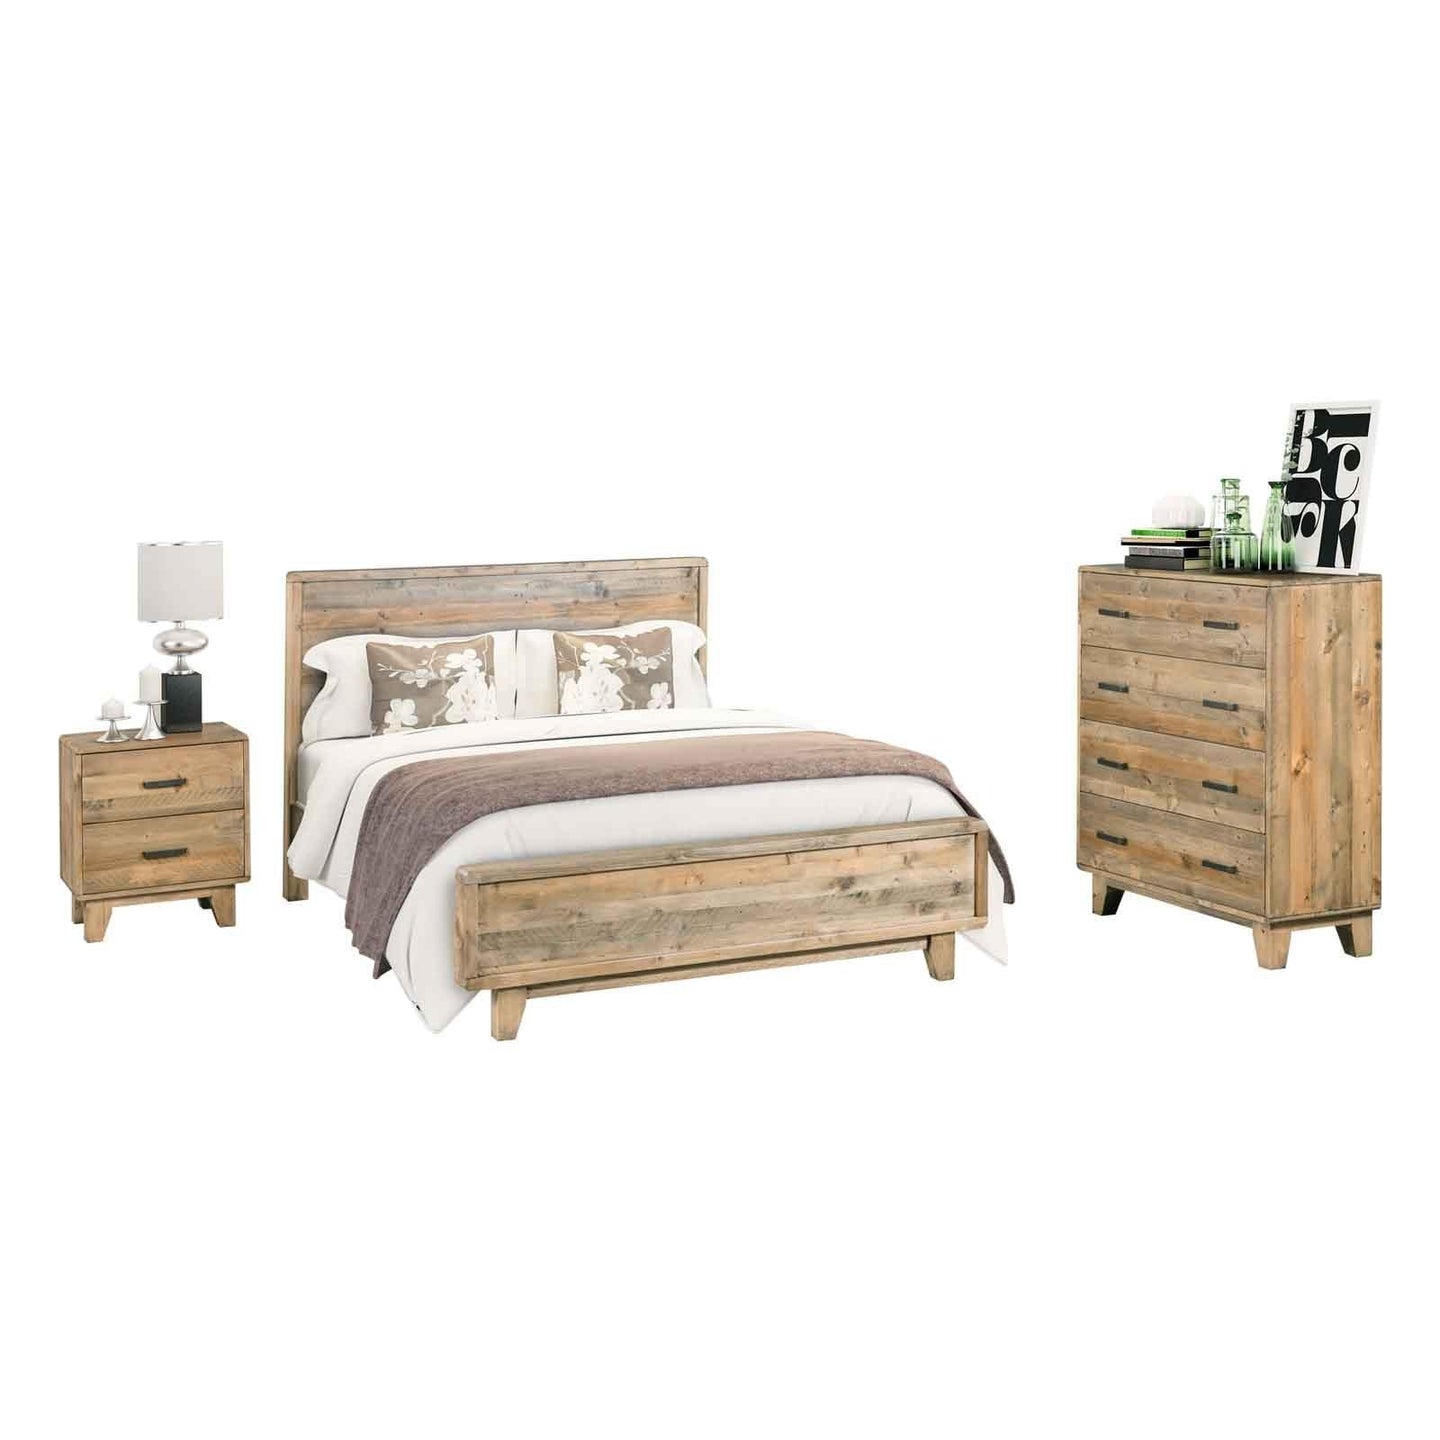 Buy 4 Pieces Bedroom Suite Queen Size in Solid Wood Antique Design Light Brown Bed, Bedside Table & Tallboy discounted | Products On Sale Australia